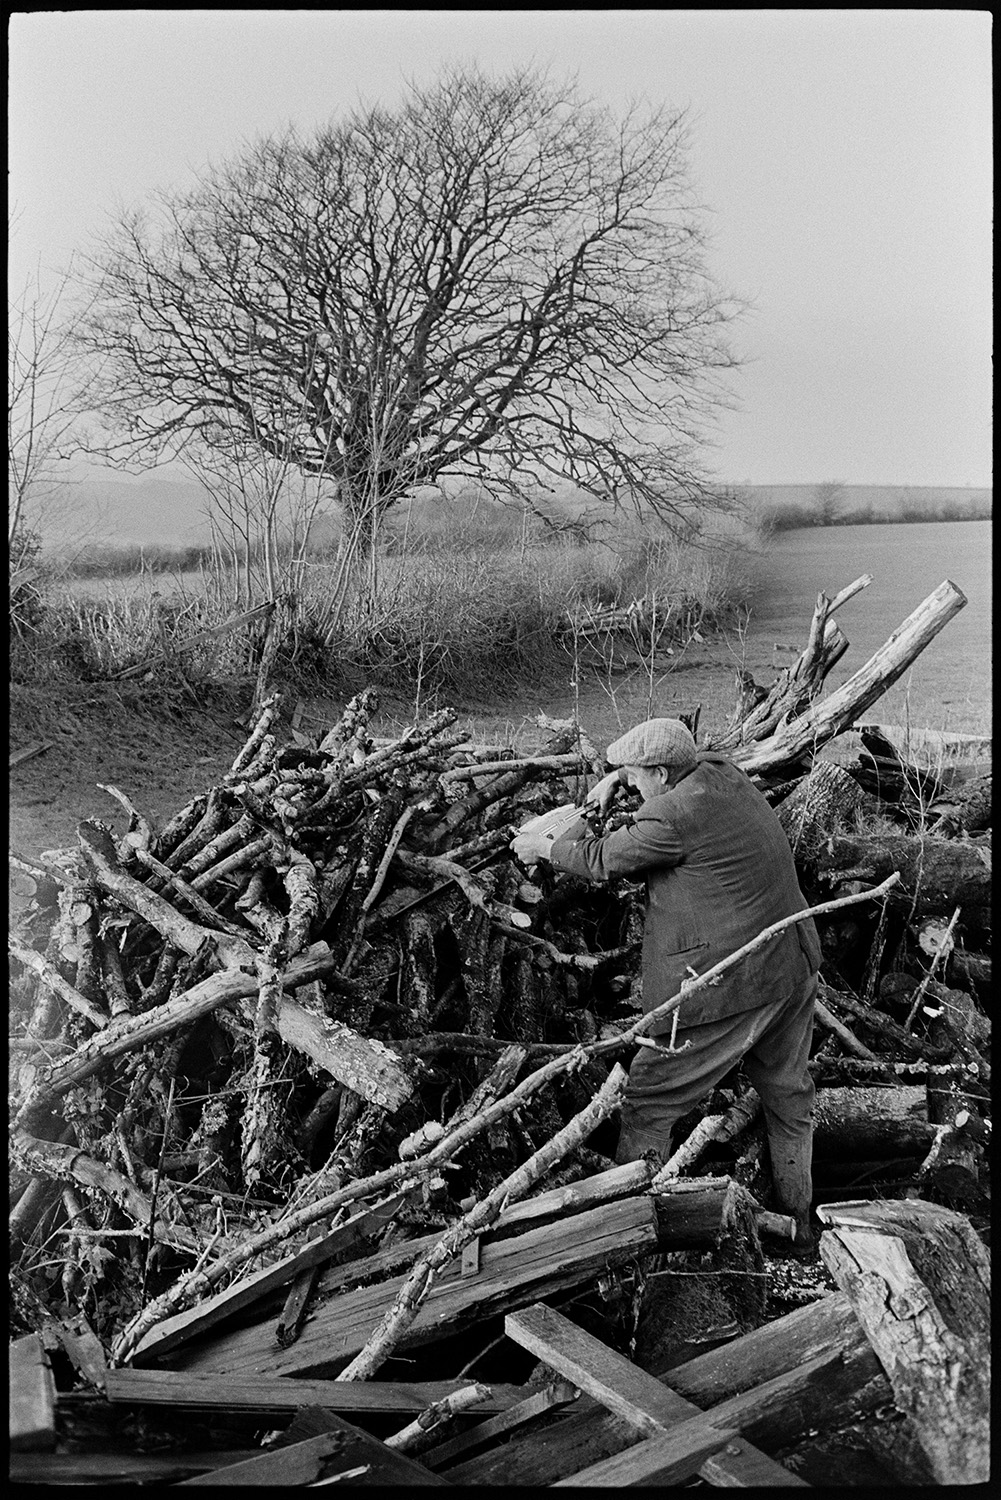 Farmer sawing logs, woodpile with chainsaw. 
[George Ayre sawing up logs in a woodpile in a field at Ashwell, Dolton. He is using a chainsaw.]